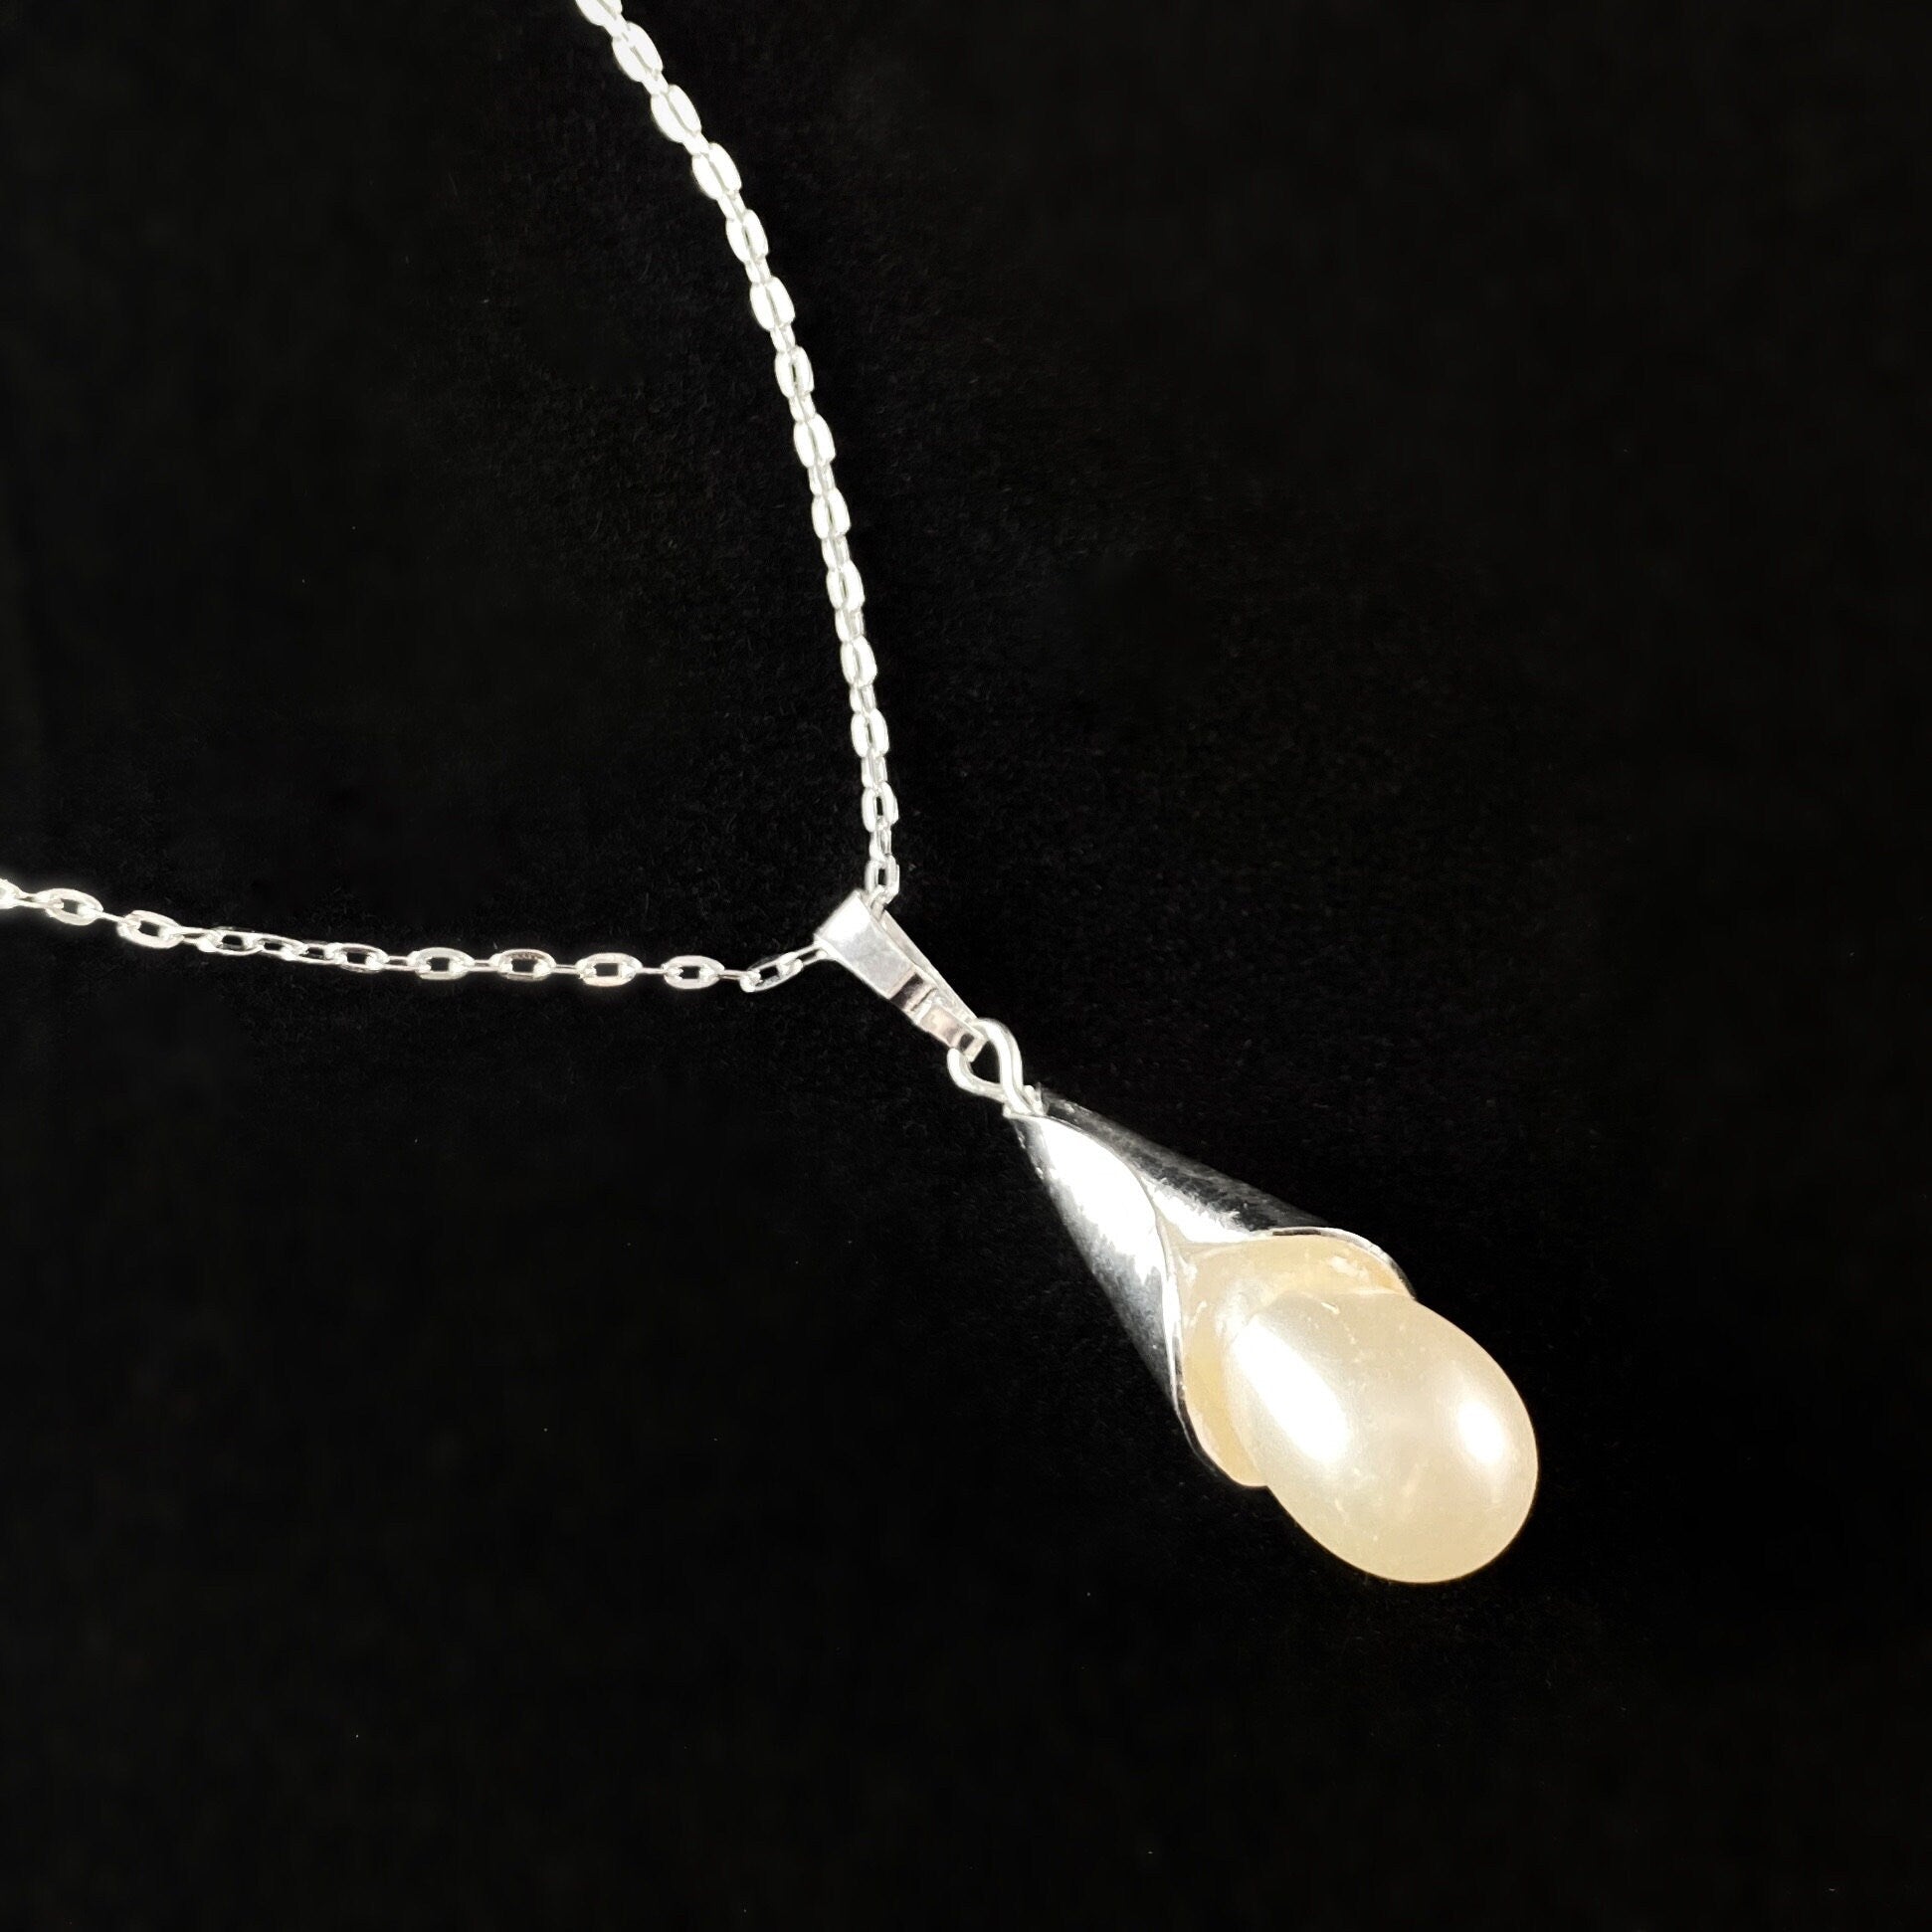 Dainty Silver Necklace with Small Cream Pendant - Handmade Nickel Free Ulla Jewelry